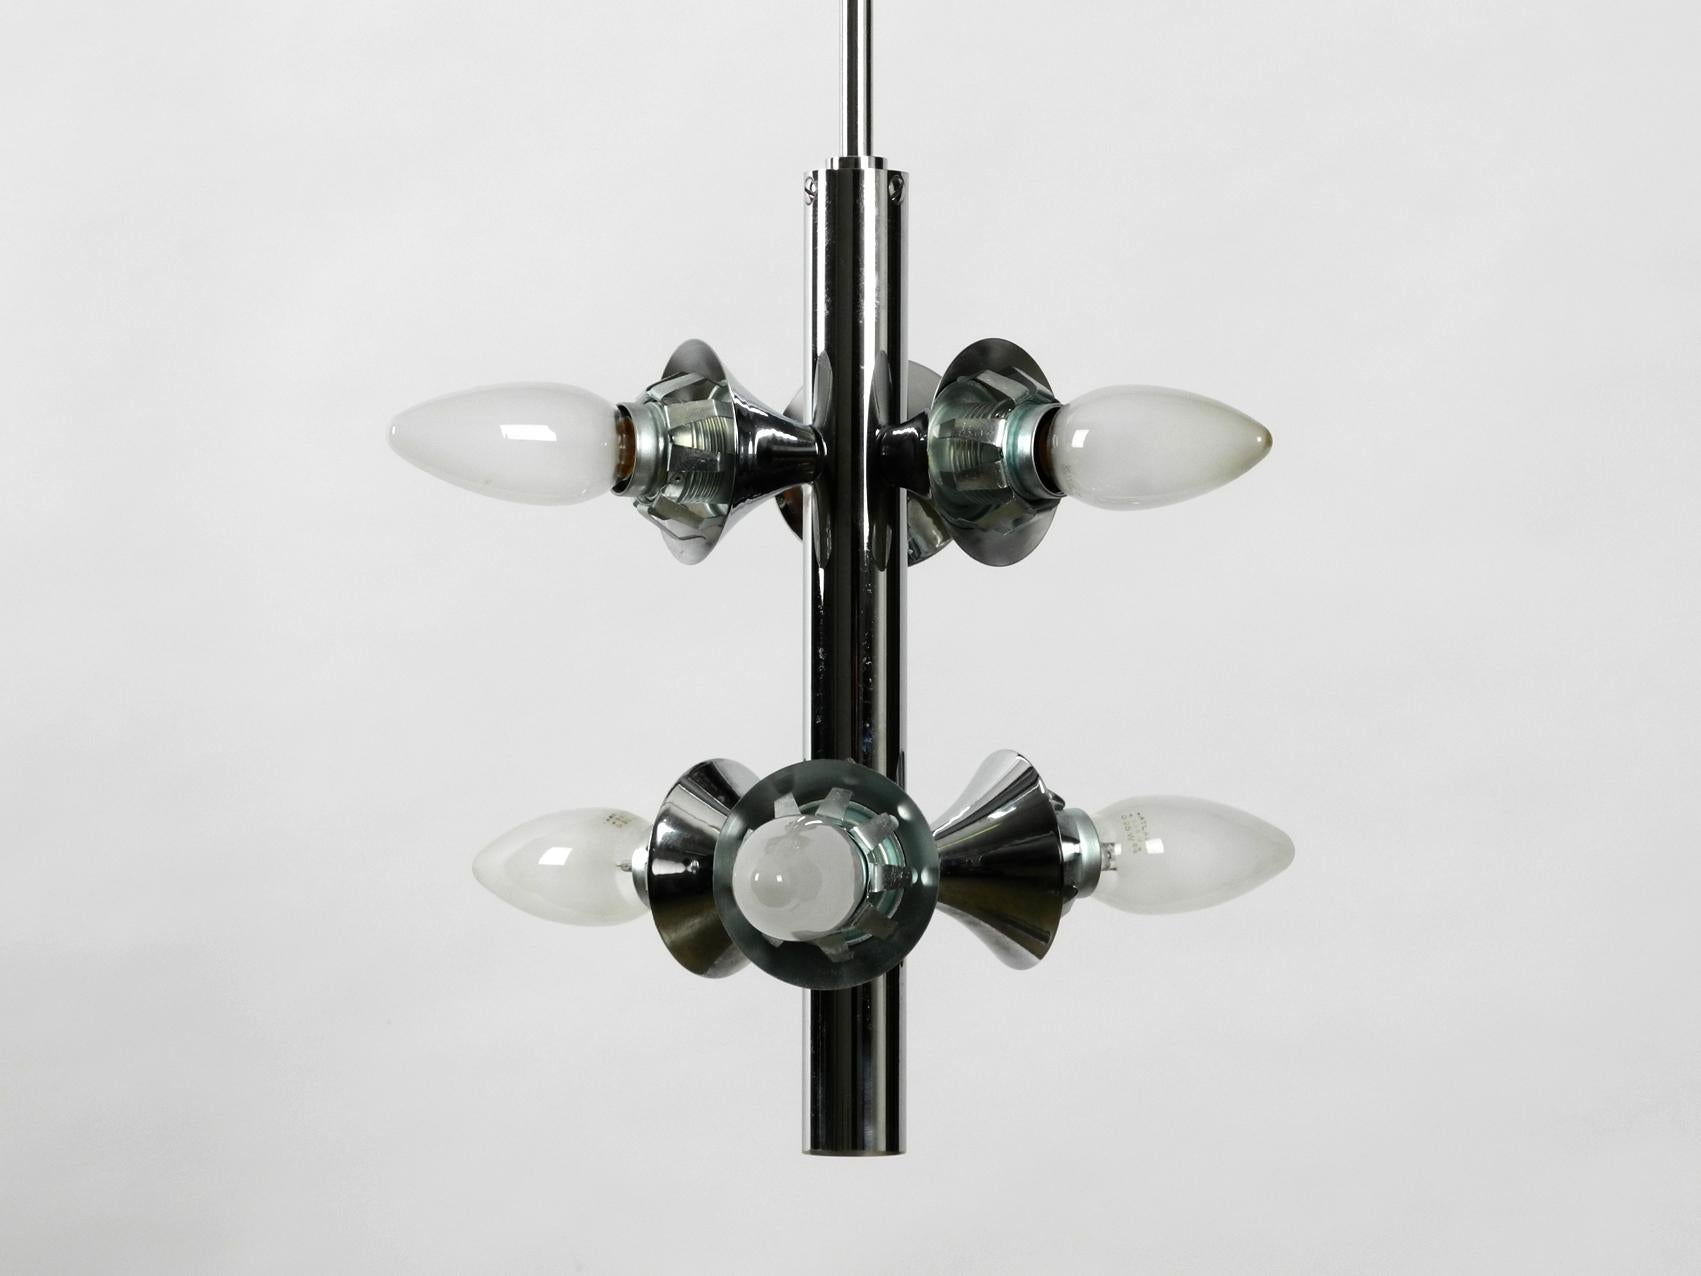 1960s Kaiser Chrome-Plated Metal Ceiling Lamp with 6 Opal Glass Balls Sp 3